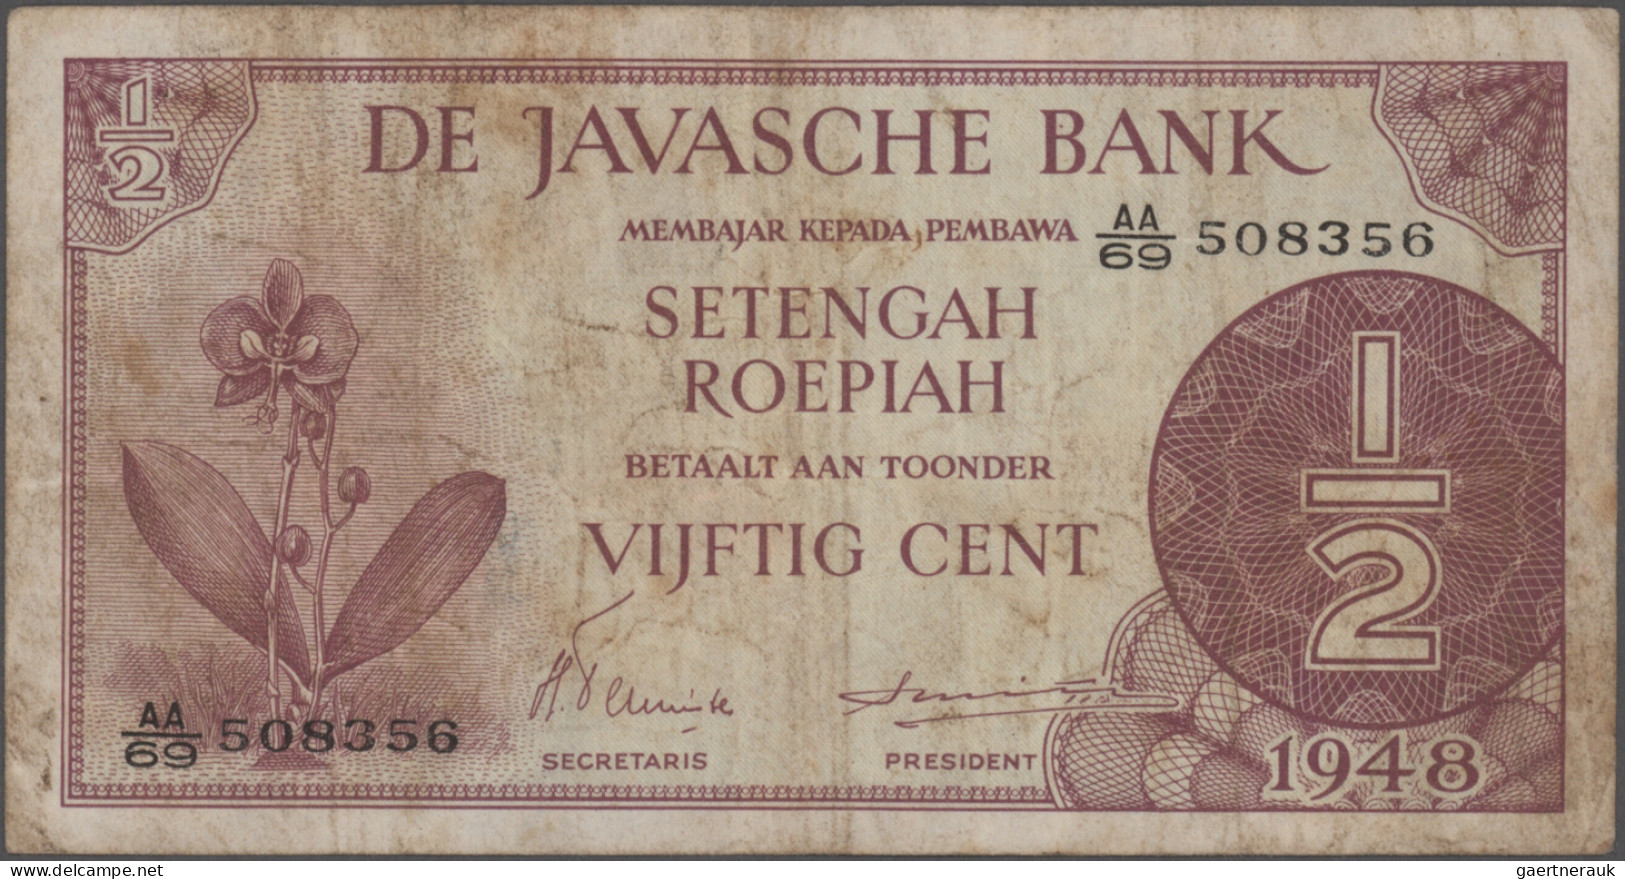 Netherlands Indies: Ministry of Finance and Javasche Bank, lot with 6 banknotes,